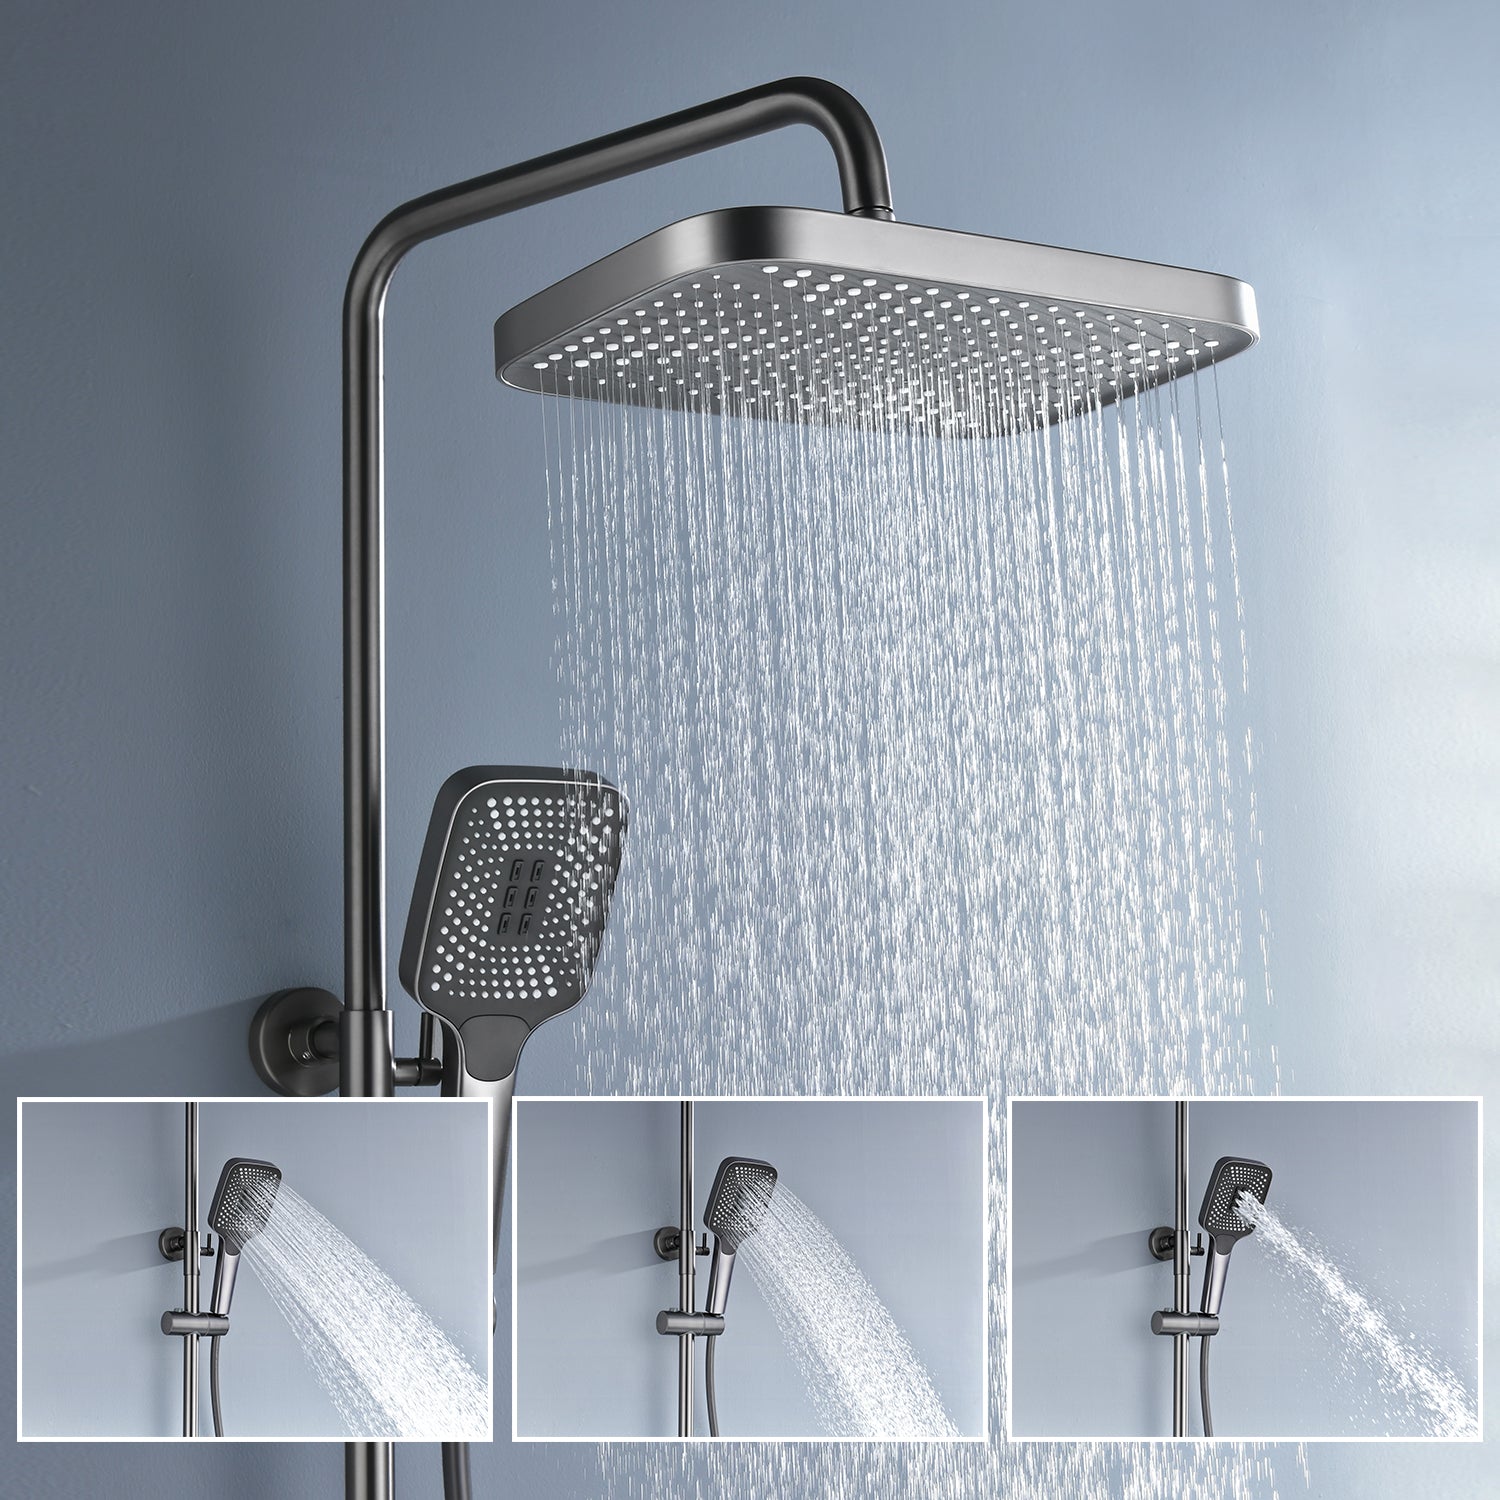 Lefton Thermostatic Shower System with Temperature Display and 4 Water Outlet Modes-SST2204